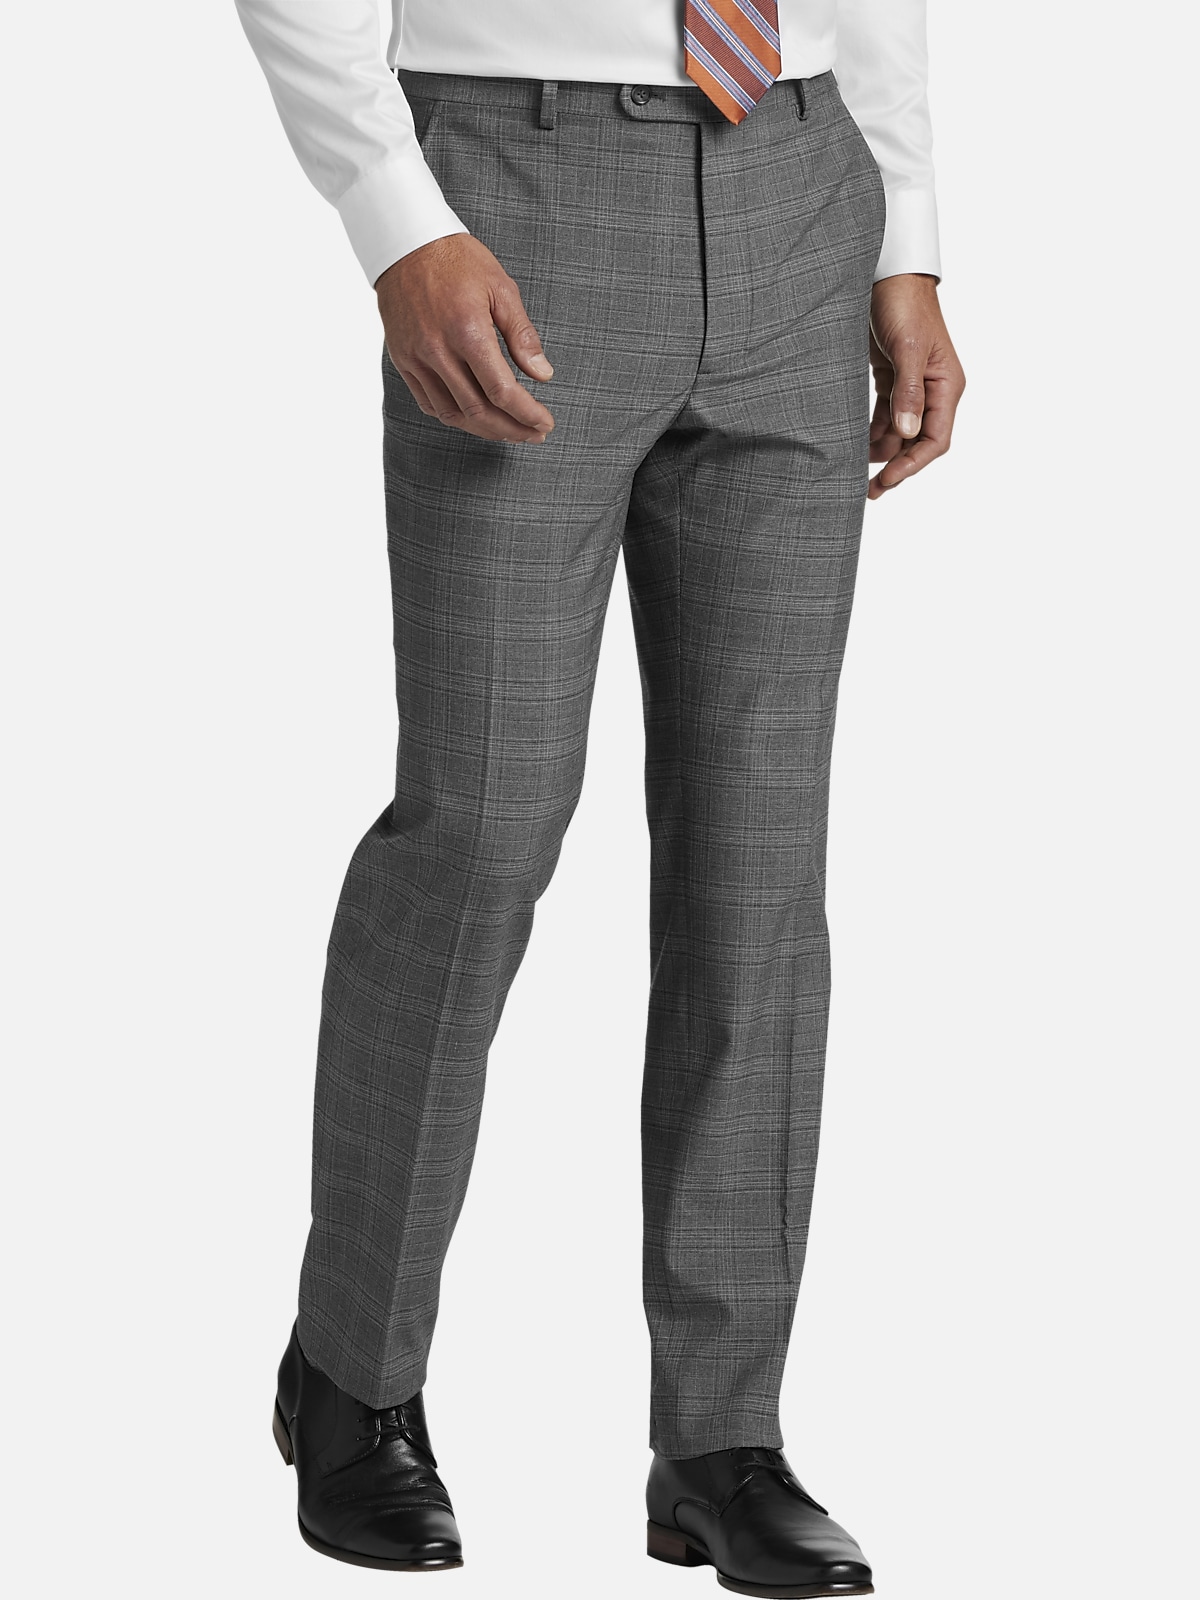 Pronto Uomo Modern Fit Suit Separates Pants | All Clearance $39.99| Men ...